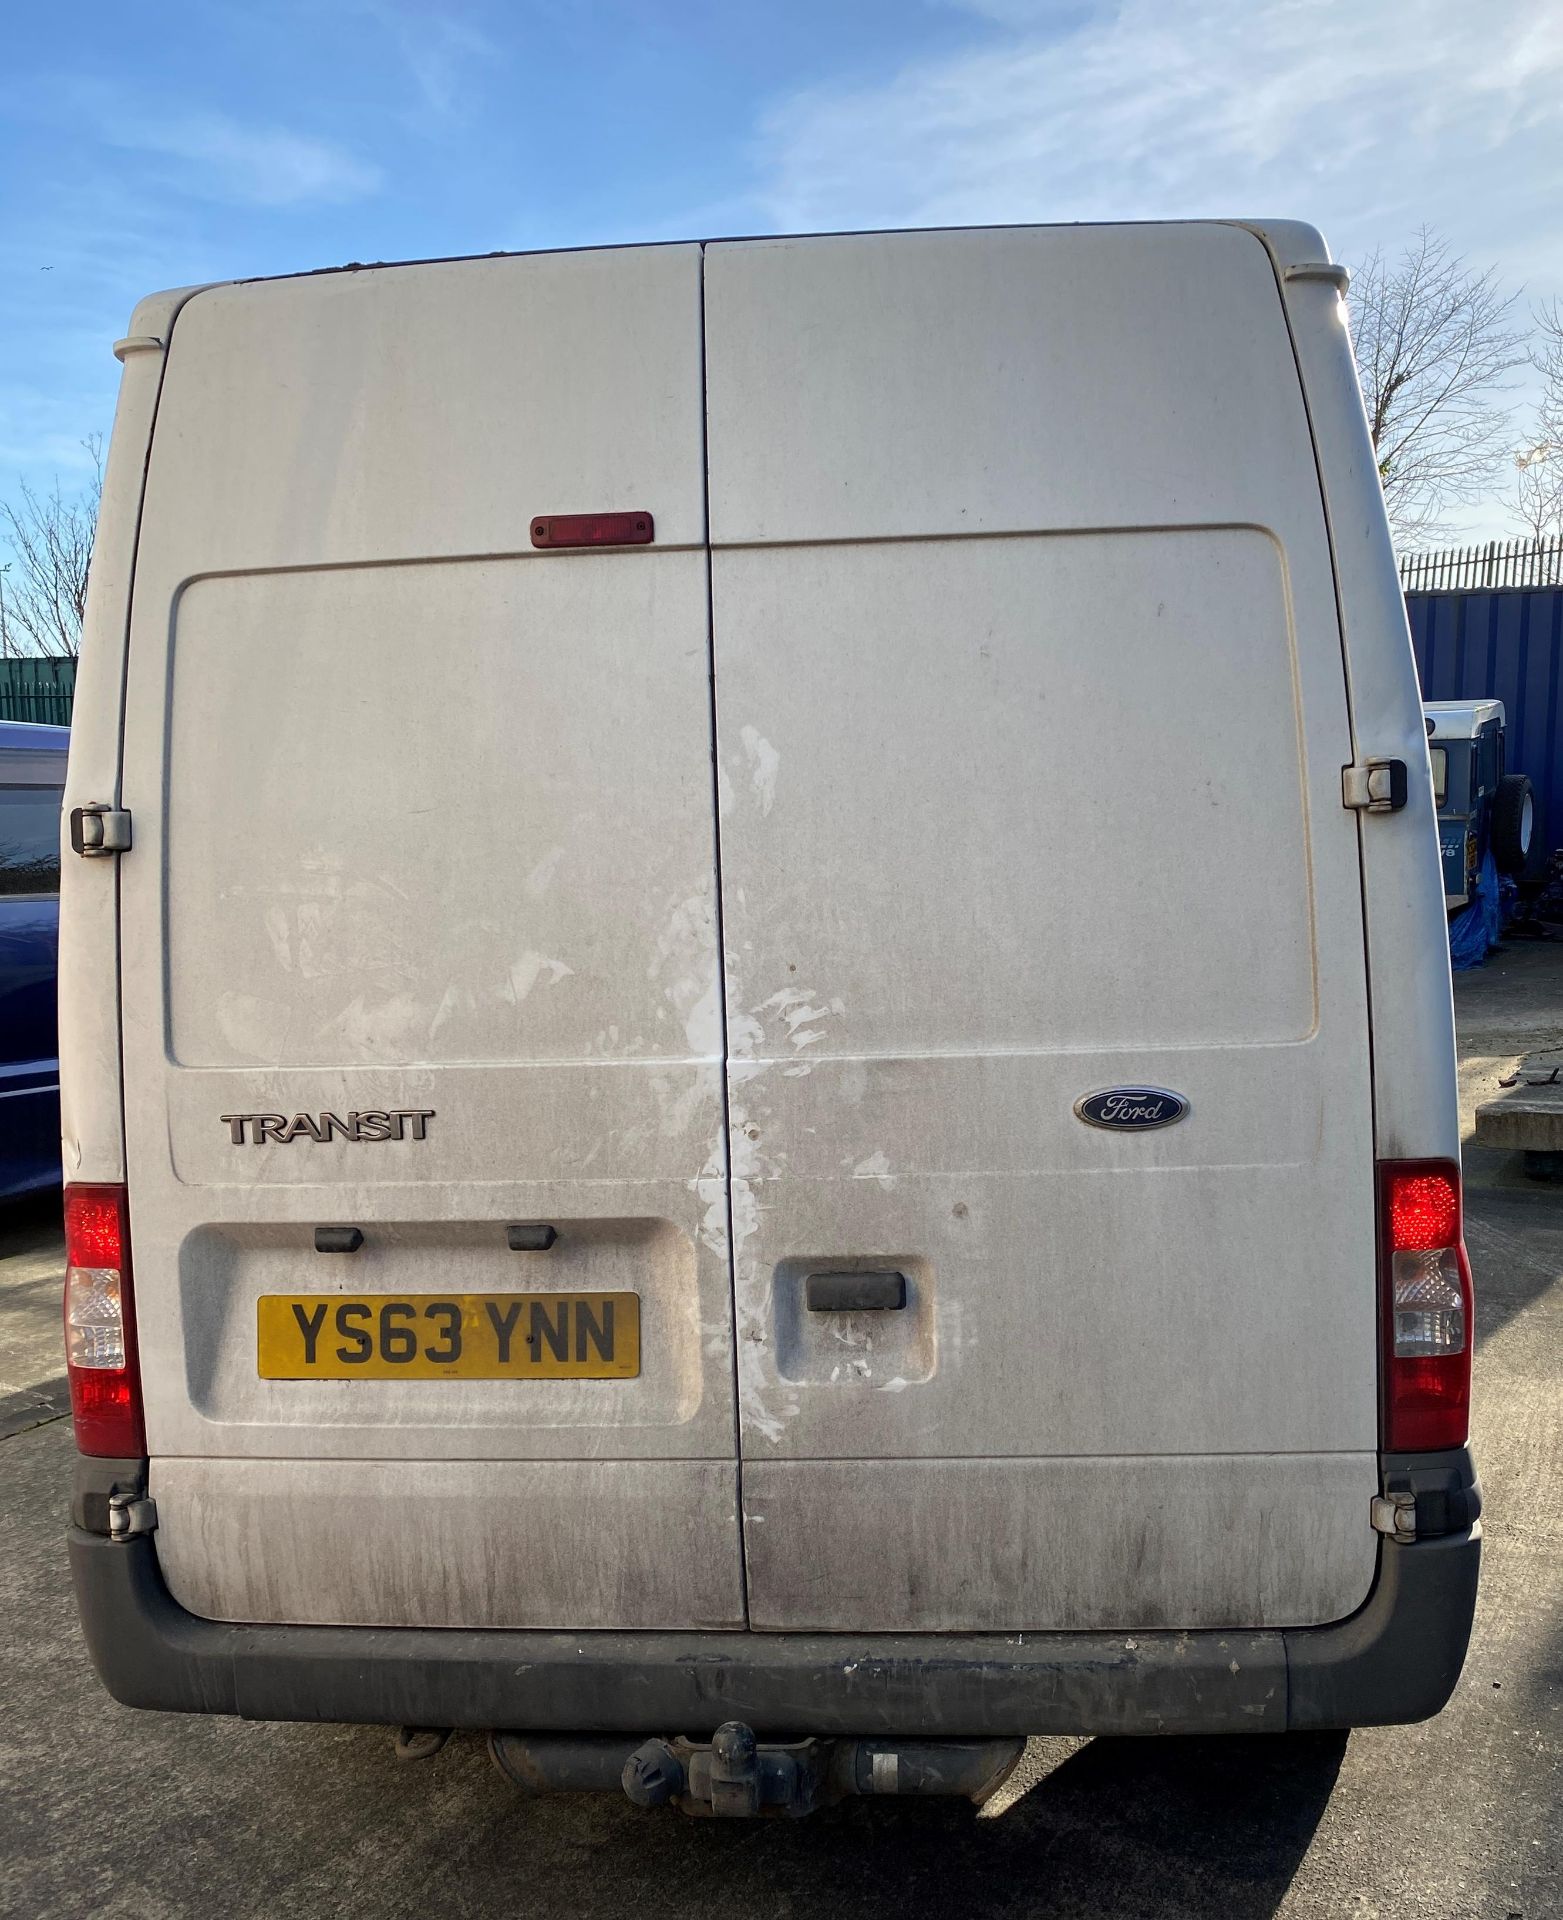 FORD TRANSIT T280 DURATORQ PANEL VAN (listed on HPI as a 125 T350 FWD) - Diesel - White. - Image 3 of 19